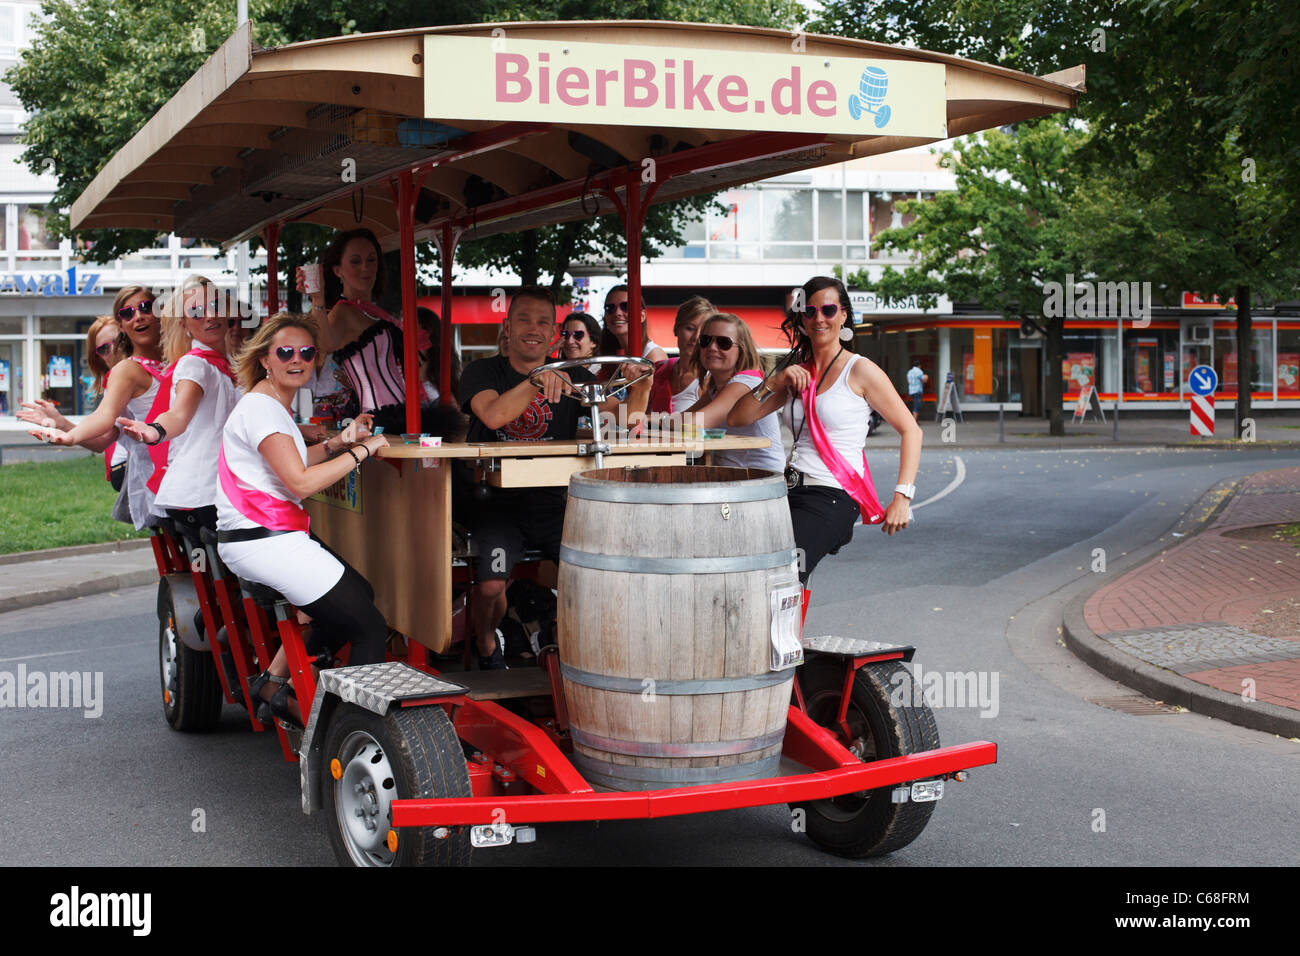 Young women pedal a bier bike in Hanover, Germany. Stock Photo